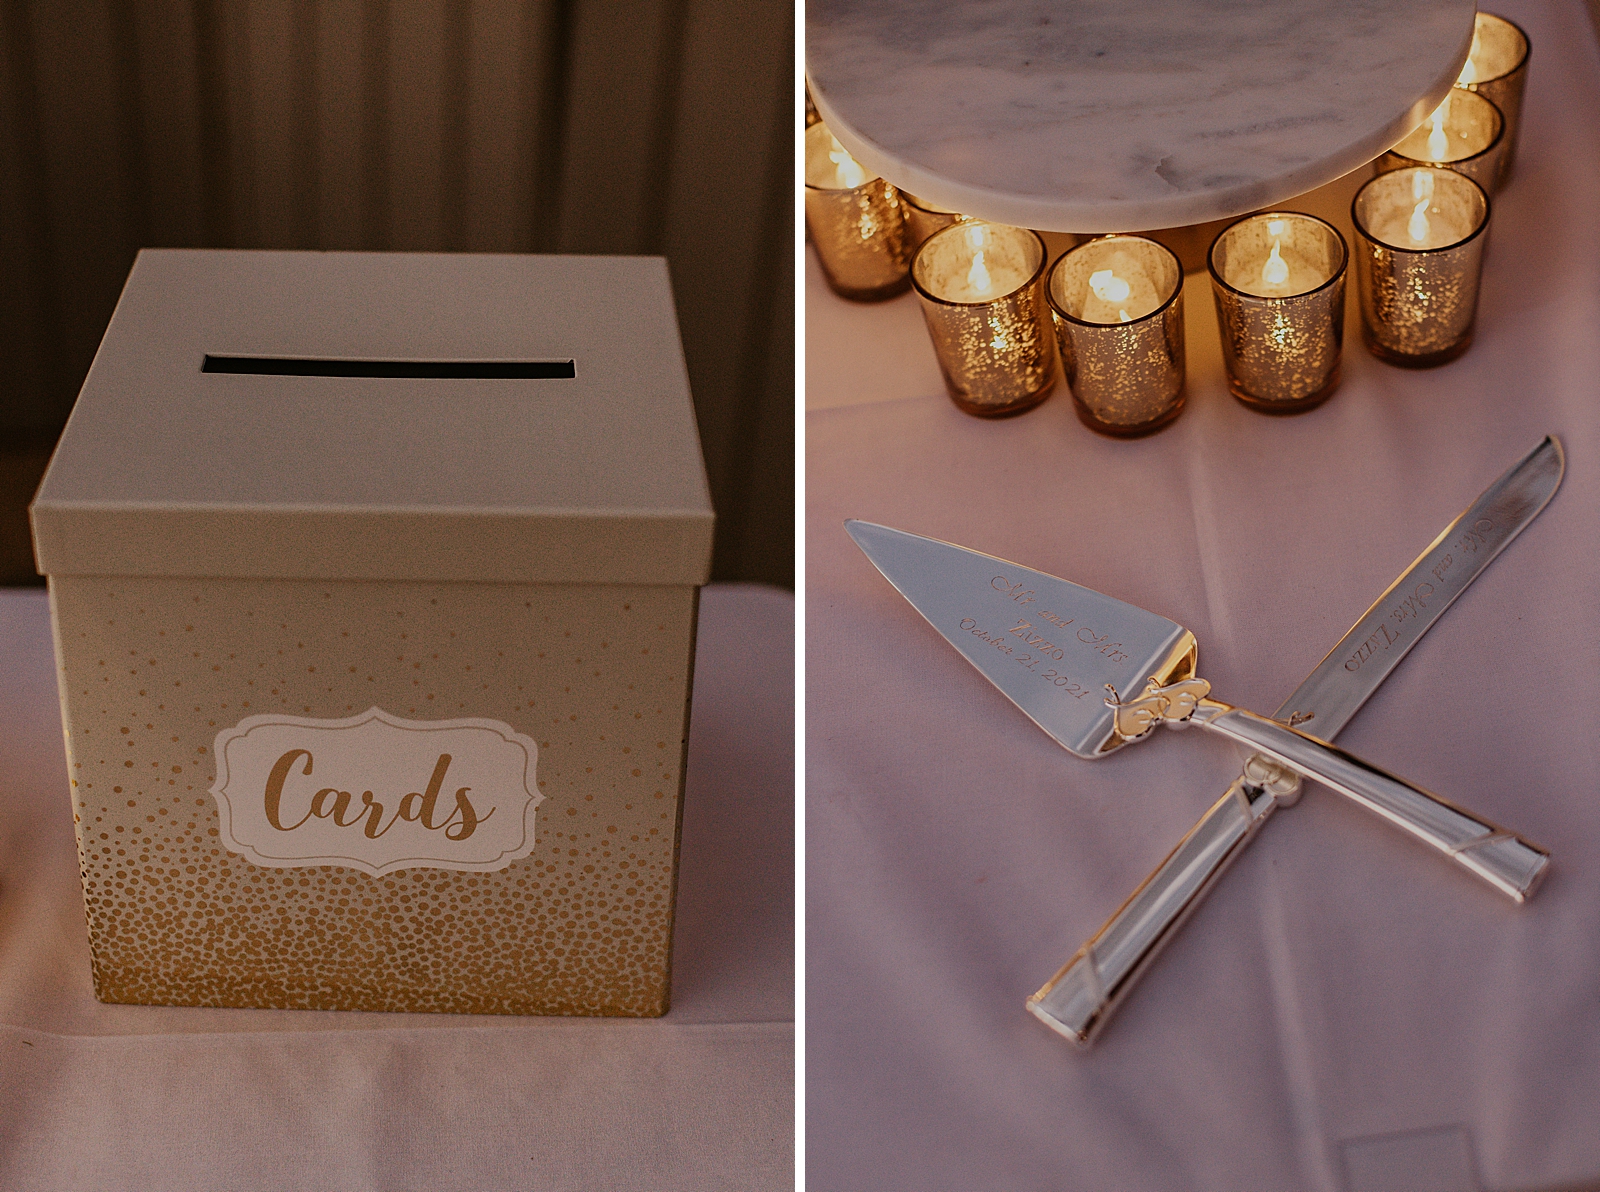 Detail shot of card box and cuttlery for cake